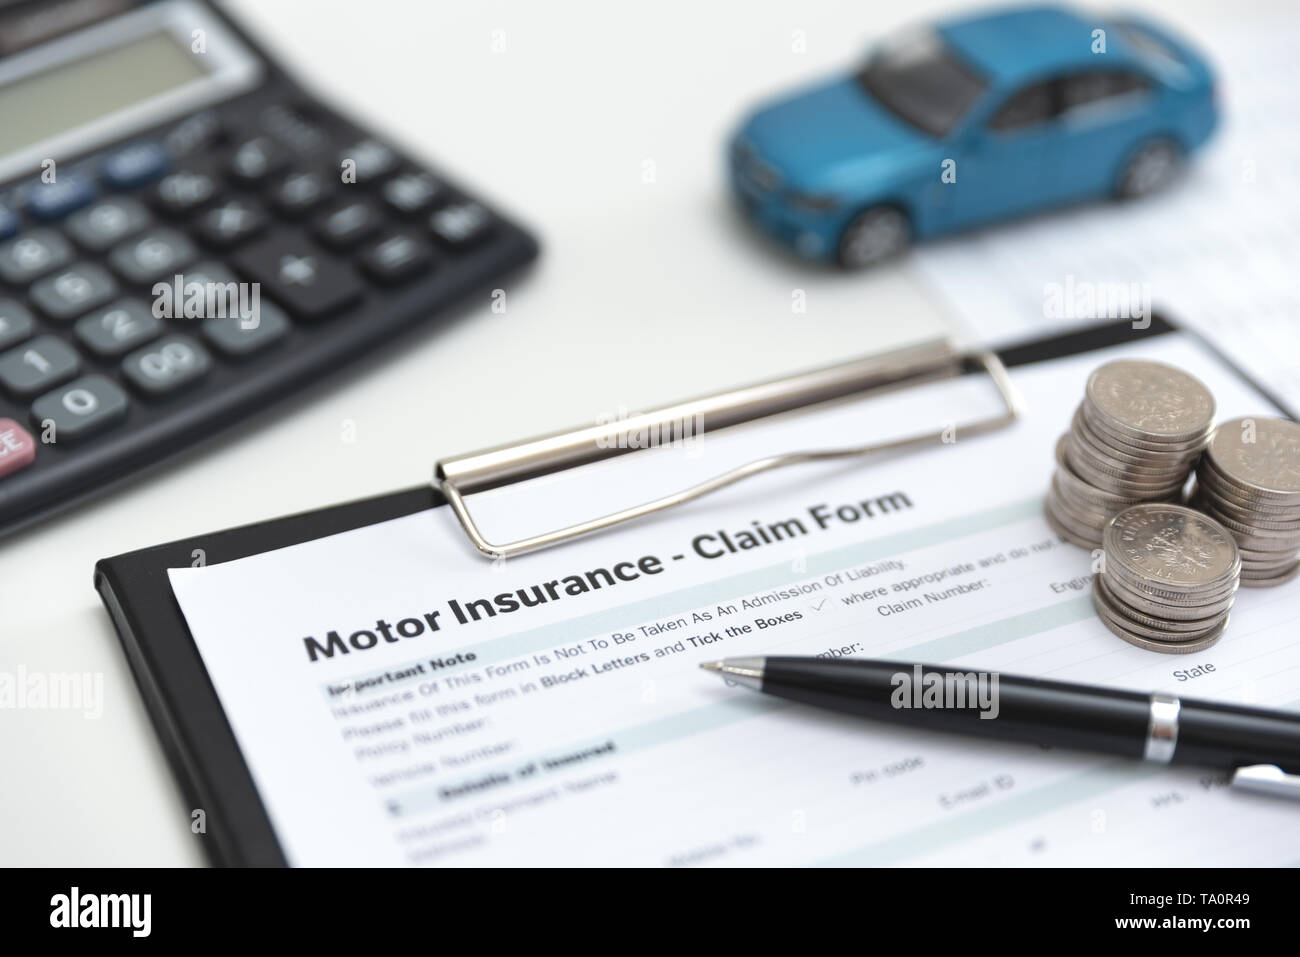 Motor or car insurance claim form with coin stack, calculator and car model. Stock Photo